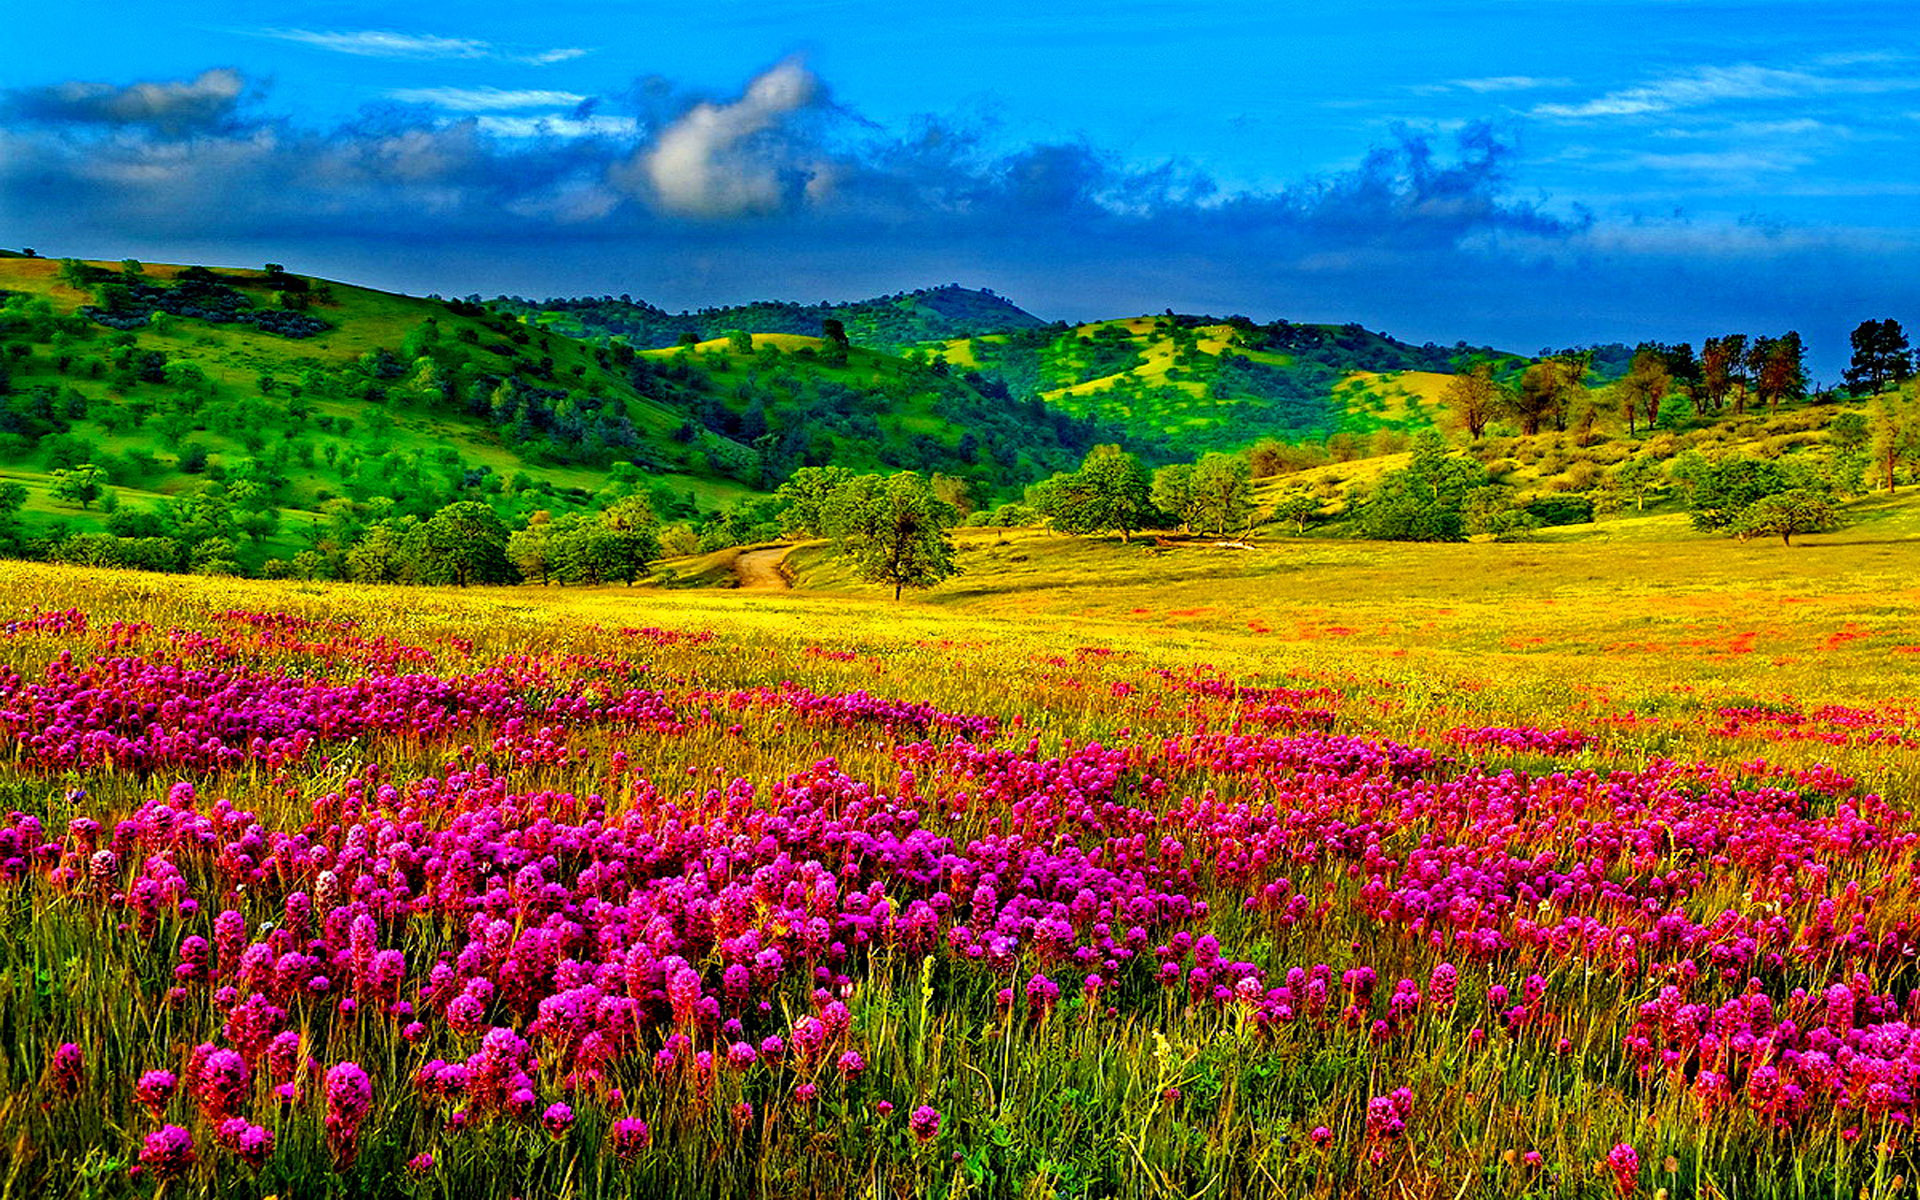 Meadow With Purple Flowers, Hills With Trees And Green Grass Sky